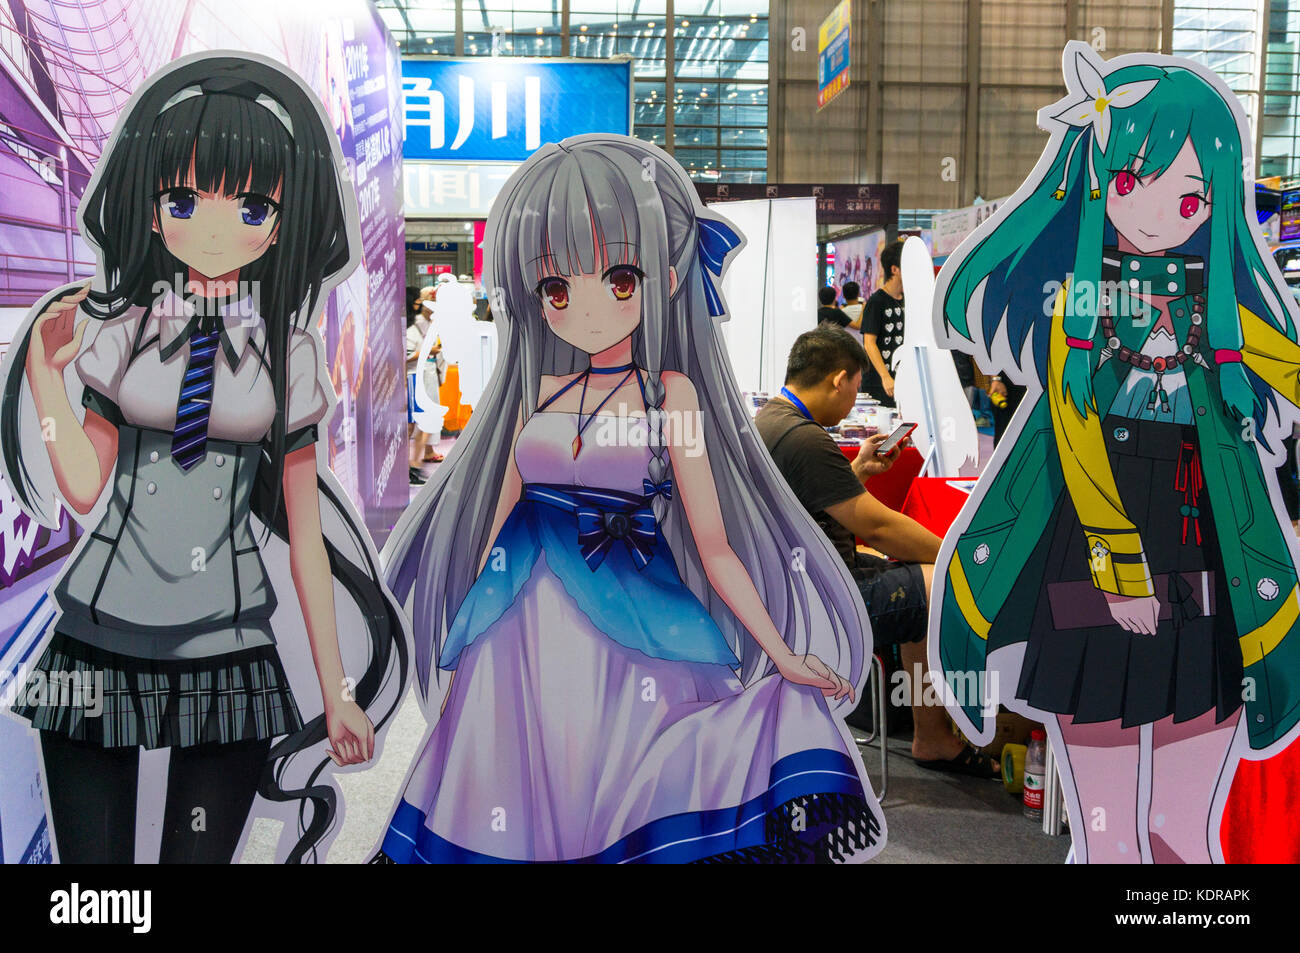 Cardboard cut-outs of Japanese anime characters, displayed in Shenzhen, China Stock Photo